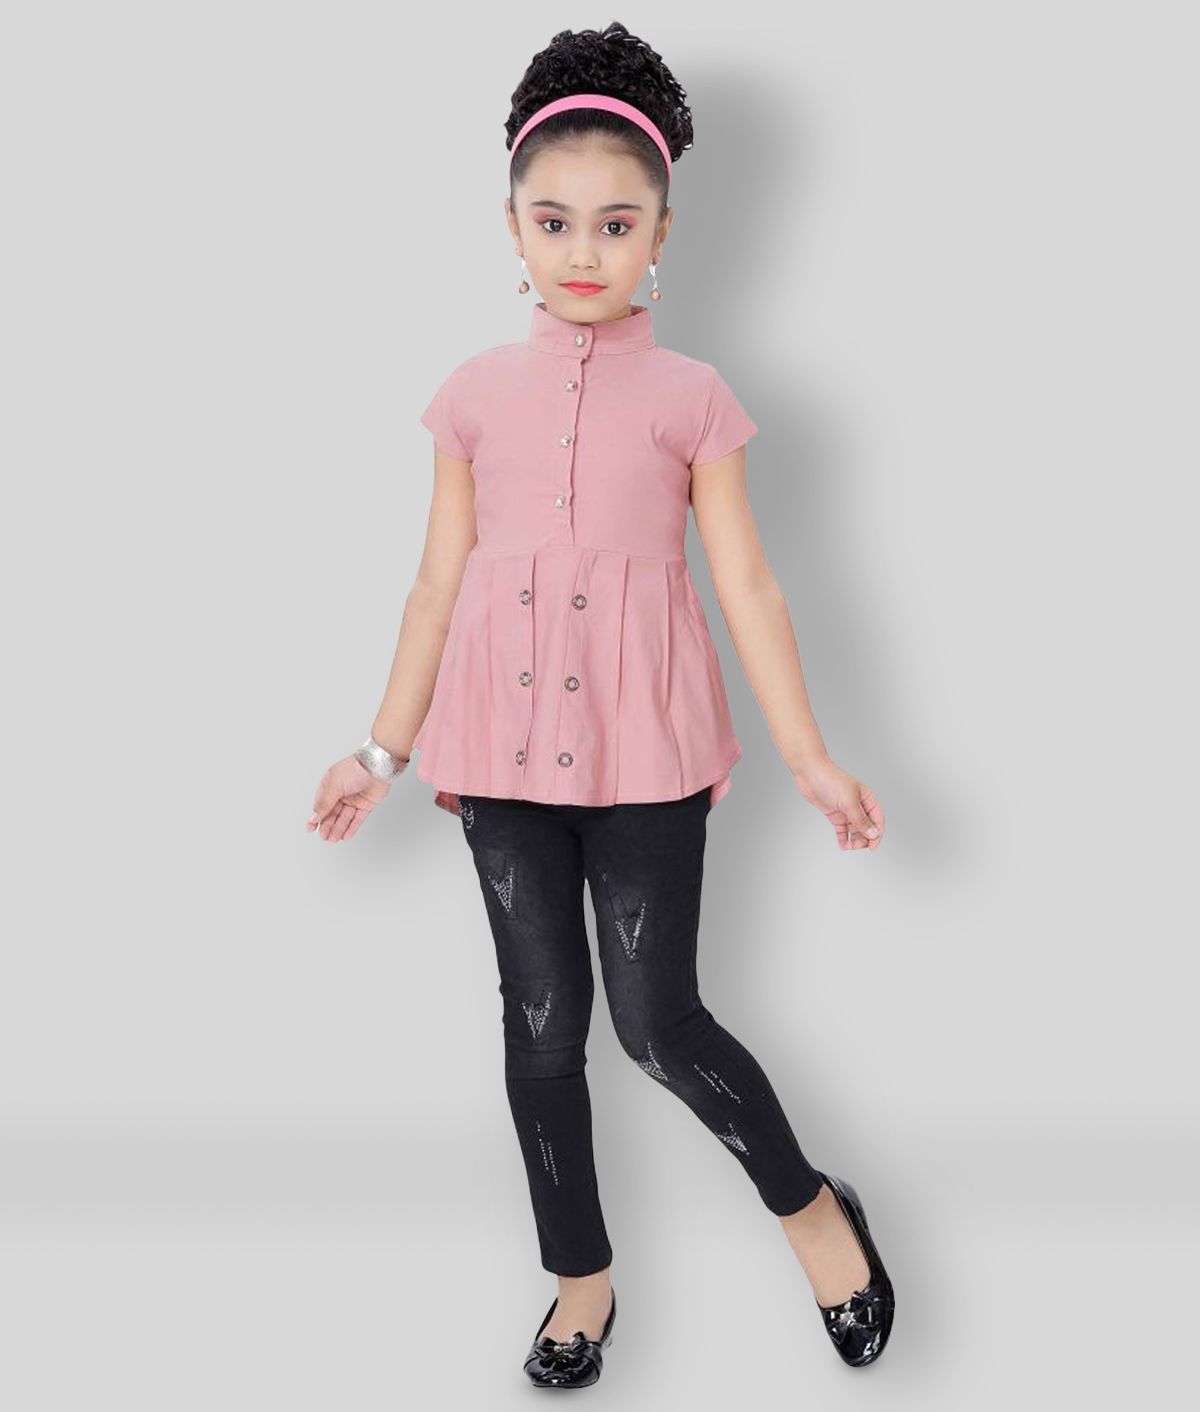     			Arshia Fashions - Pink Cotton Blend Girl's Top With Jeans ( Pack of 1 )